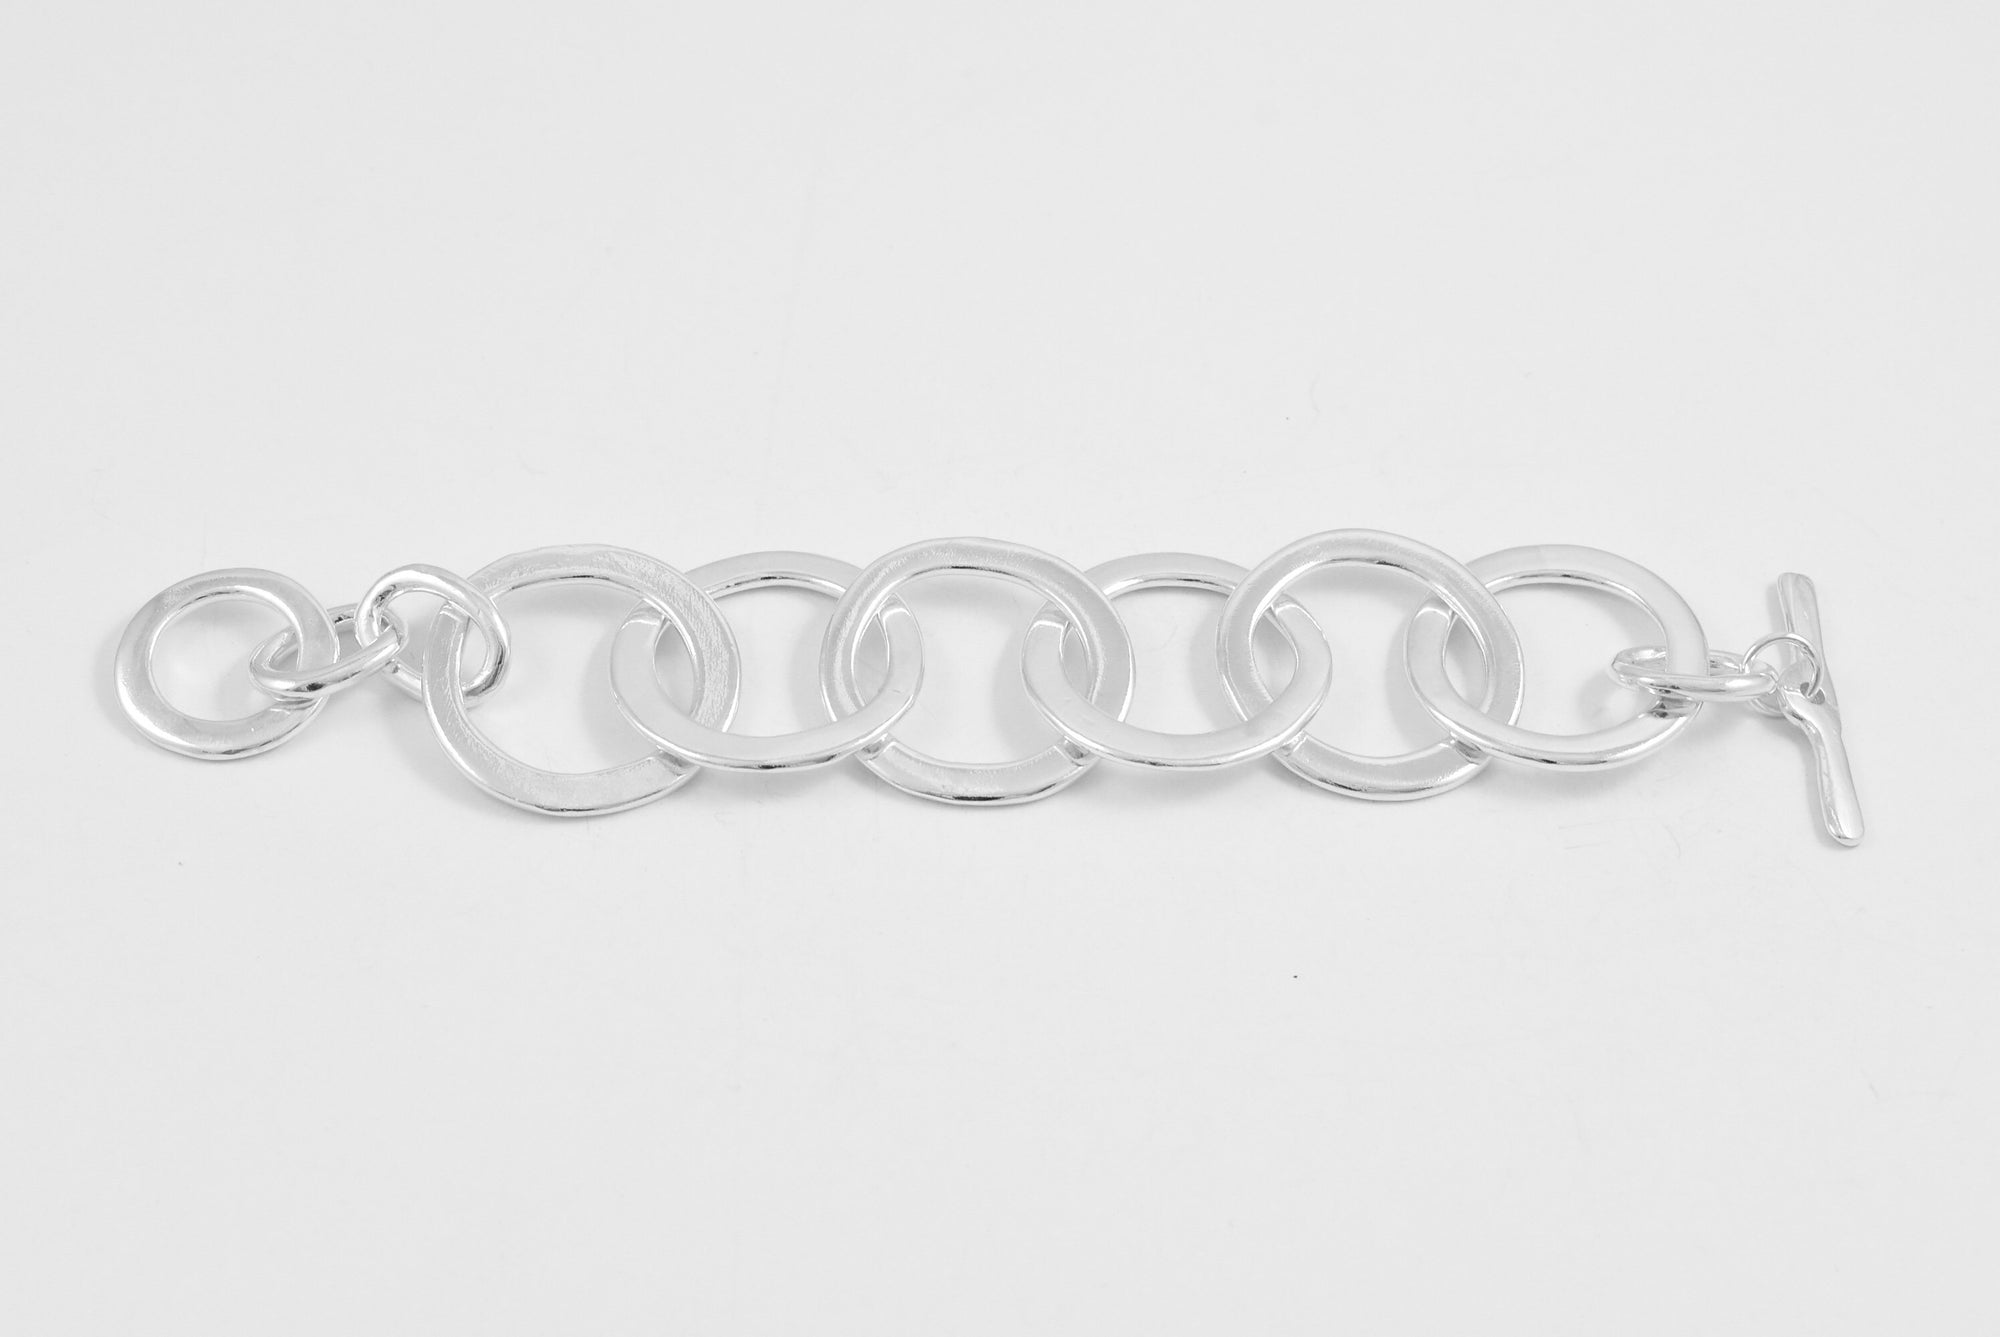 The Elizabeth Bracelet features 6 large round sterling silver links with a statement toggle